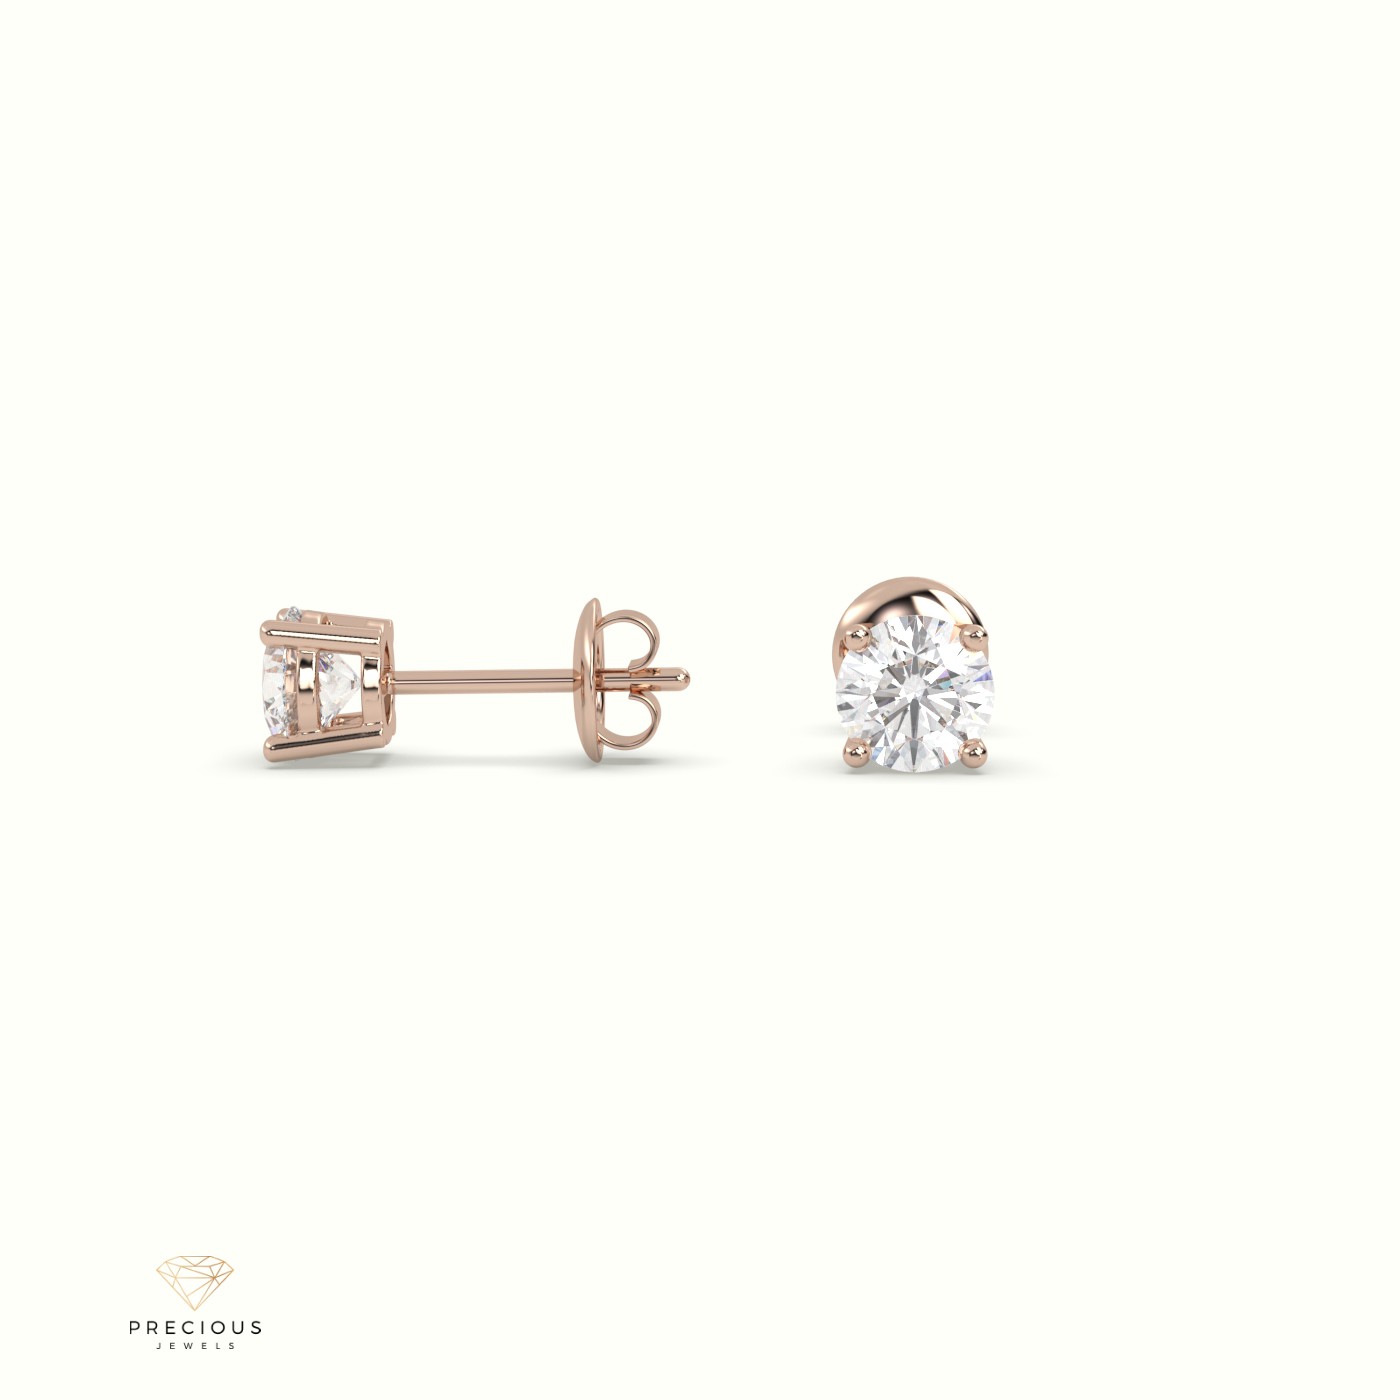 18k rose gold  4 prongs classic round diamond earring studs Photos & images